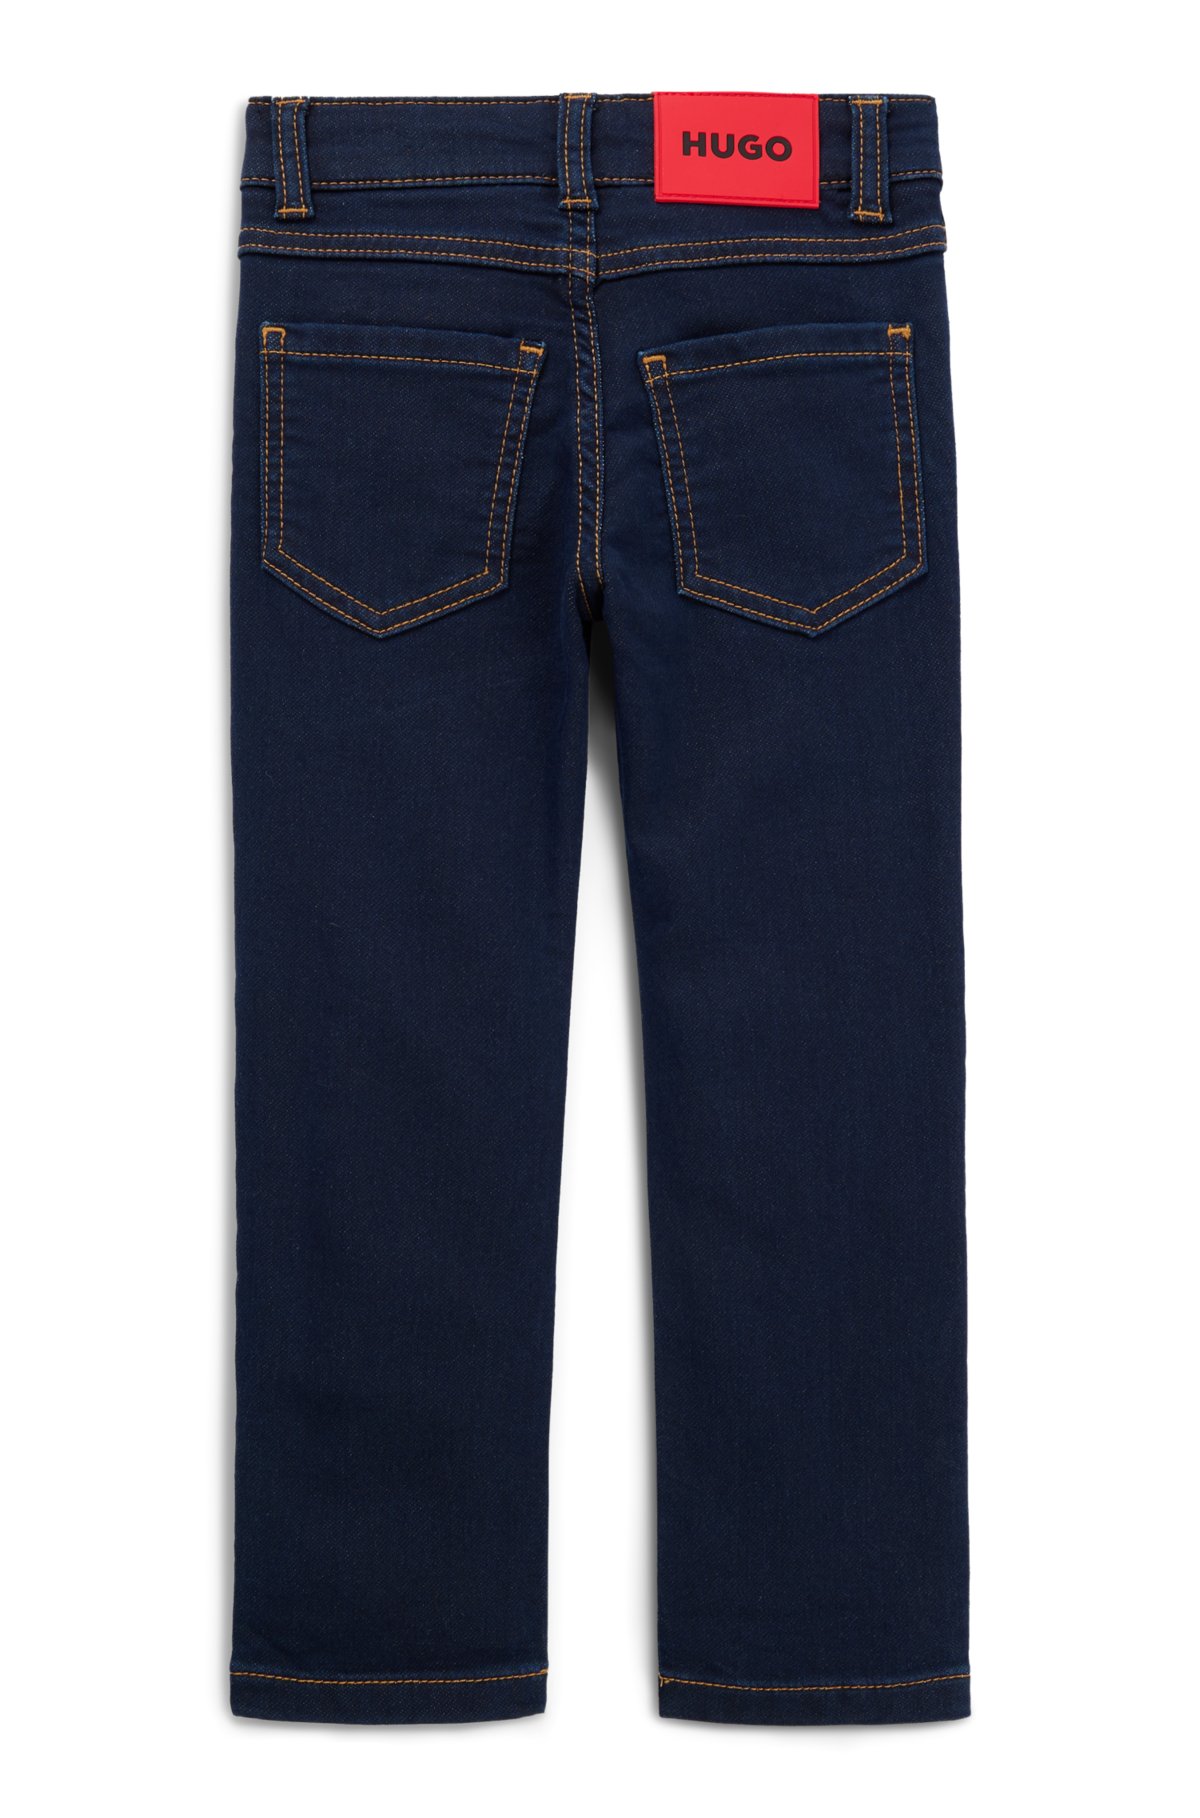 Juniors by Lifestyle Kids Blue Cotton Skinny Fit Jeggings